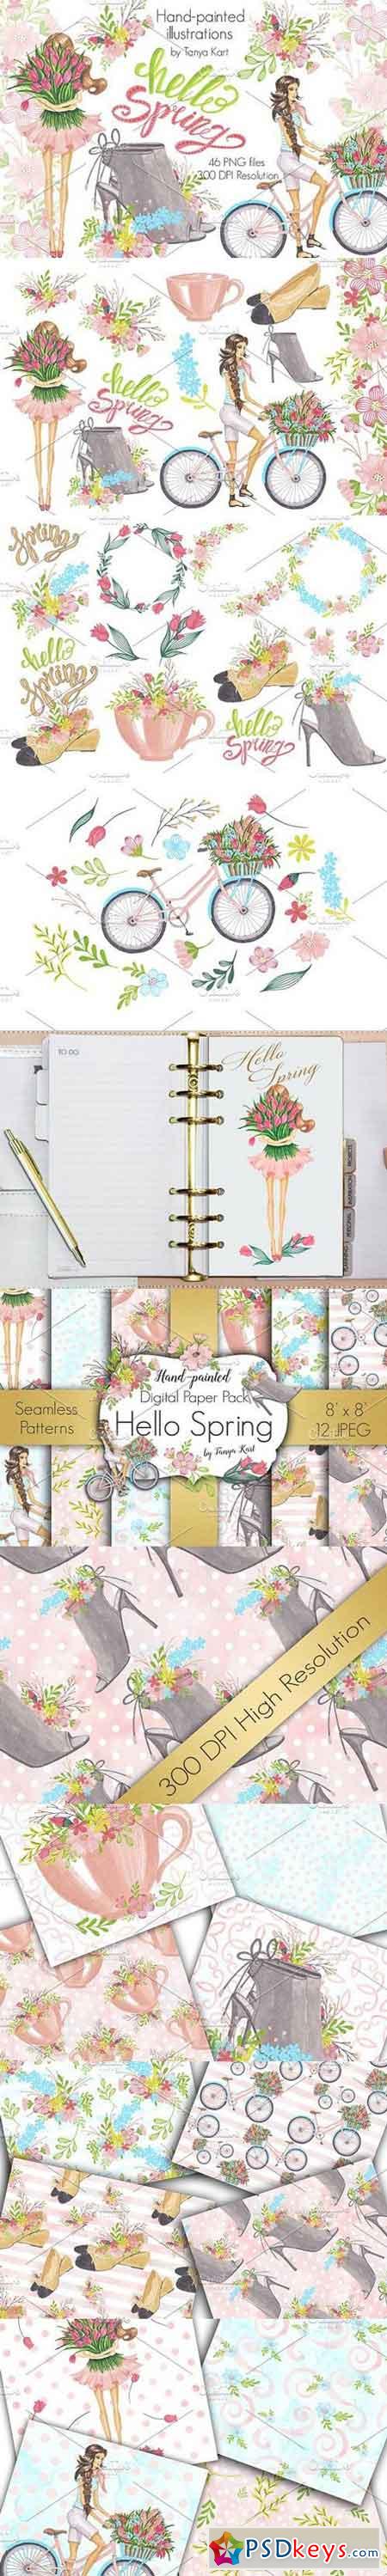 Hello Spring Hand-painted Collection 1238622